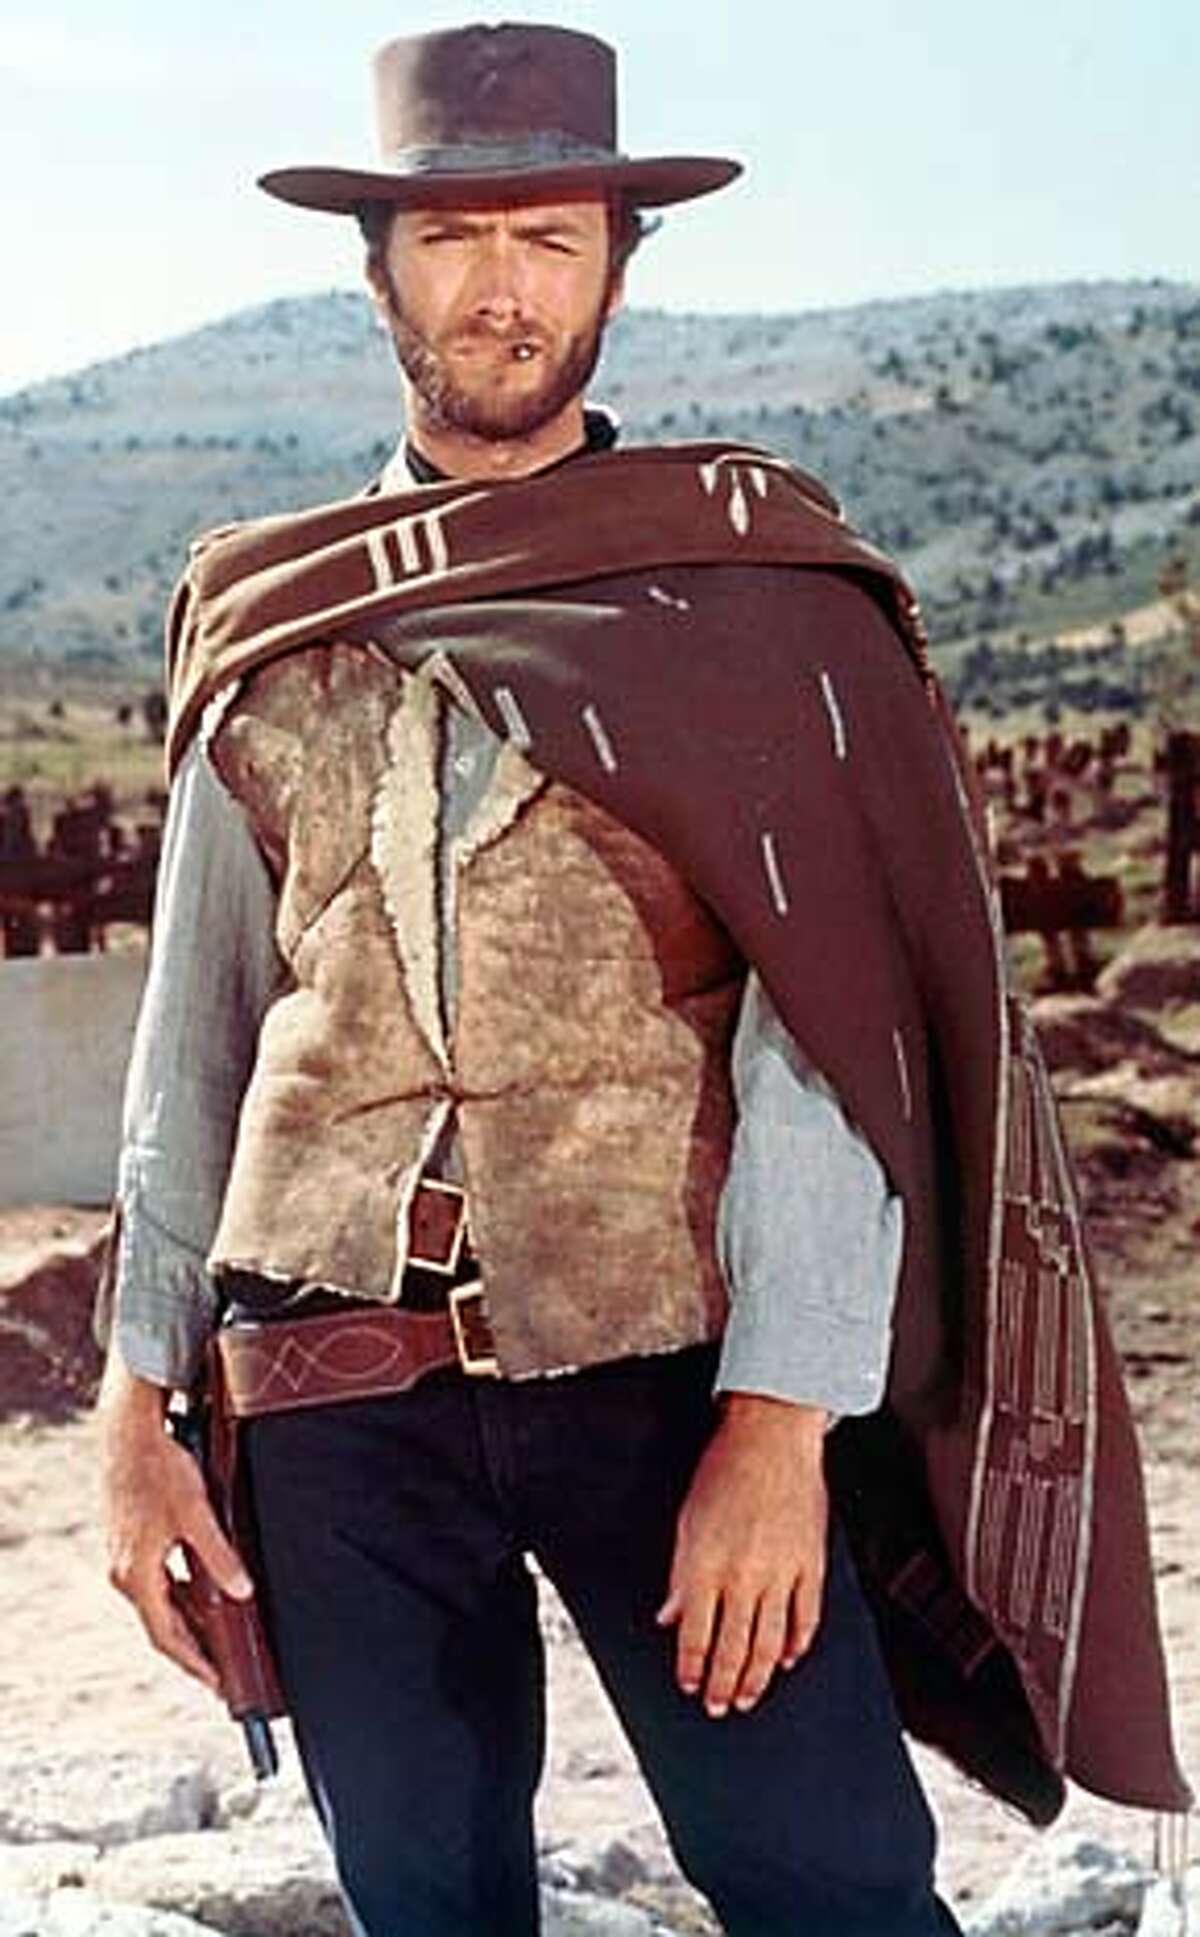 (NYT17) UNDATED -- May 21, 2003 -- Adv. for Sunday, May 25 -- GOOD-BAD-UGLY -- It is with vastness and stillness that Sergio Leone's ``The Good, the Bad and the Ugly'' excites an audience, and those qualities are gloriously, thrillingly evident in the newly restored version, 35 years after its initial New York run. Clint Eastwood (the Good) in a restored scene from "The Good, the Bad and the Ugly." (MGM/The New York Times) **ONLY FOR USE WITH STORY BY ELVIS MITCHELL SLUGGED: GOOD-BAD-UGLY. ALL OTHER USE PROHIBITED. Clint Eastwood in The Good, the Bad and the Ugly: cut. XNYZ, HFO, **ONLY FOR USE WITH STORY BY ELVIS MITCHELL SLUGGED: GOOD-BAD-UGLY. ALL OTHER USE PROHIBITED.